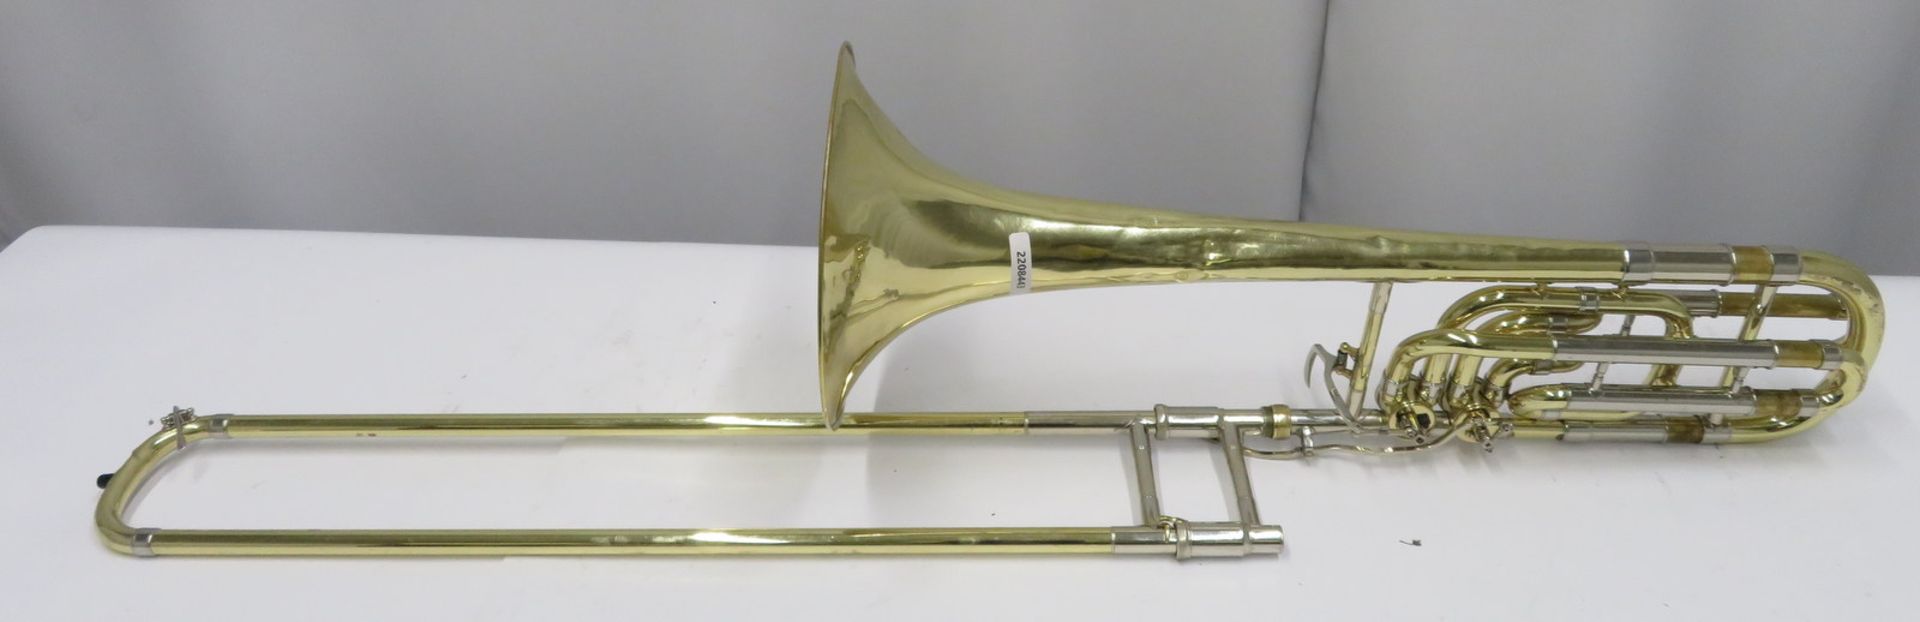 Bach Stradivarius model 50B bass trombone with case. Serial number: 85116. - Image 3 of 17